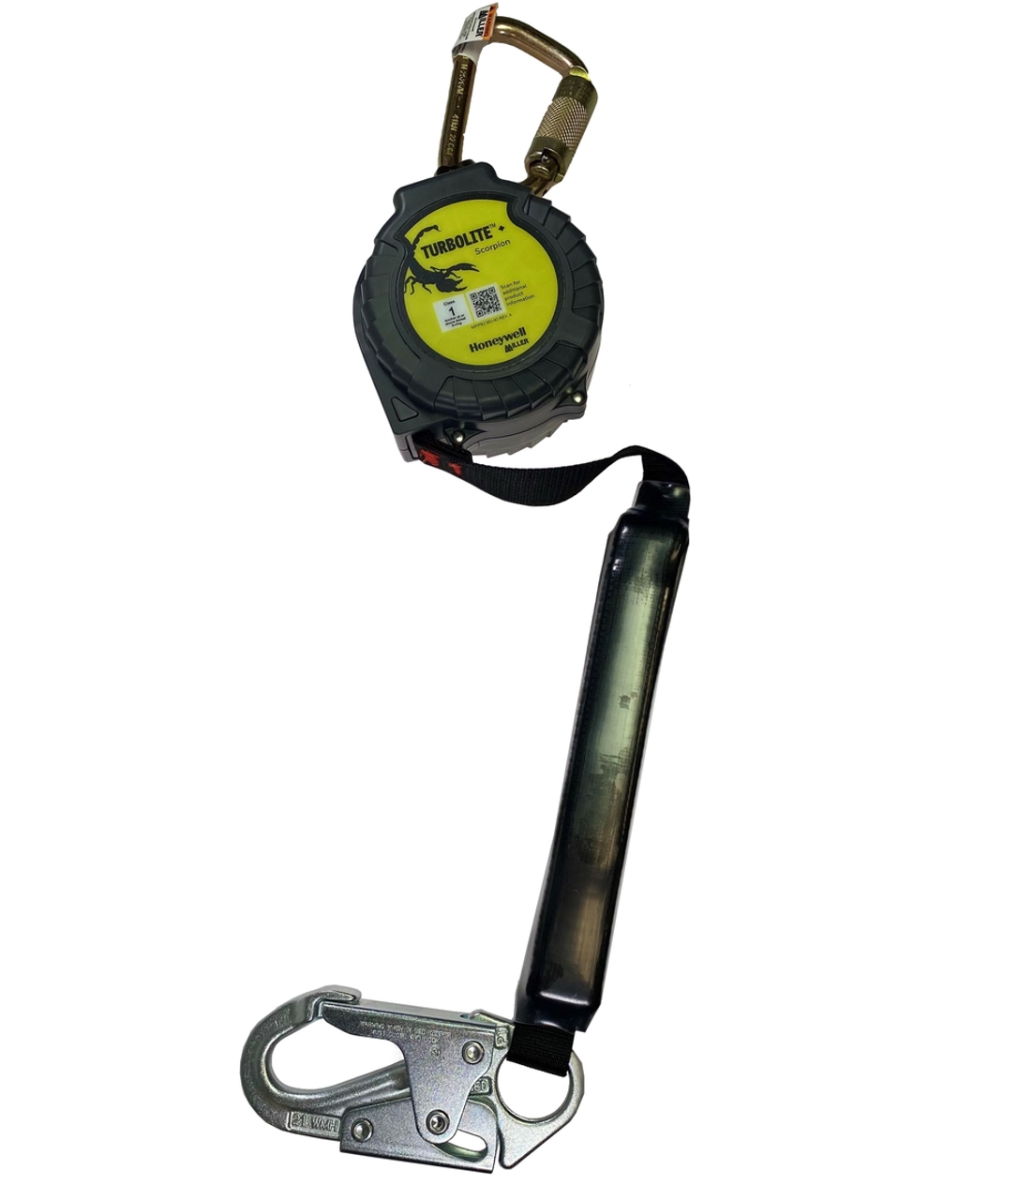 Picture of Honeywell 493-MTL-OHS1-01-9FT 9 ft. Turbolite & Scorpion Fall Limiter with Steel Snap & Carabiner